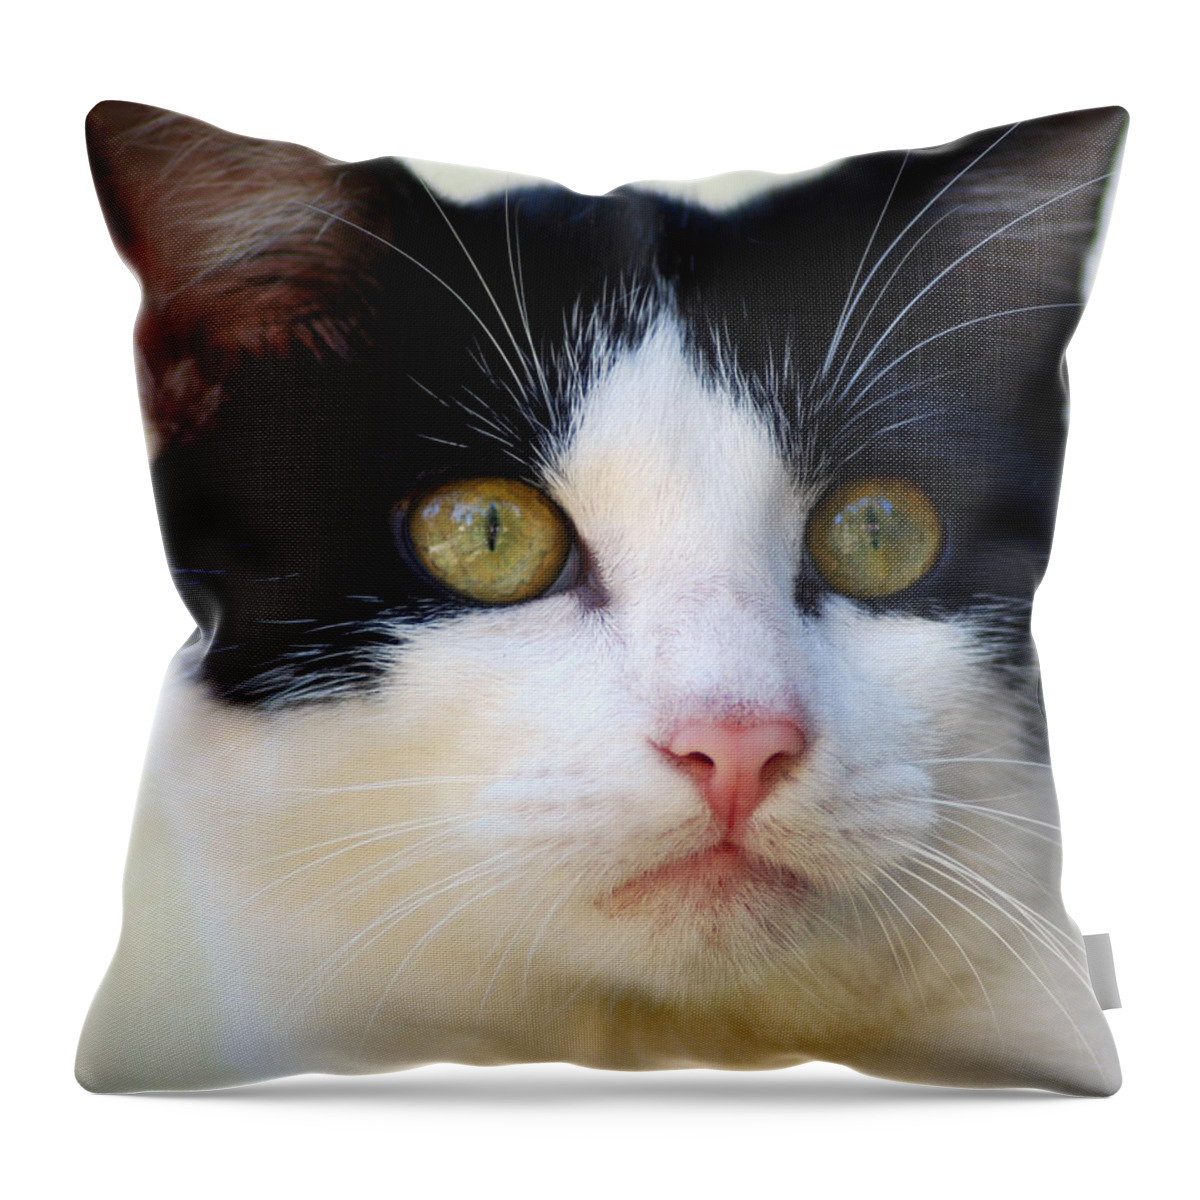 Photograph Throw Pillow featuring the photograph Cat #5 by Larah McElroy